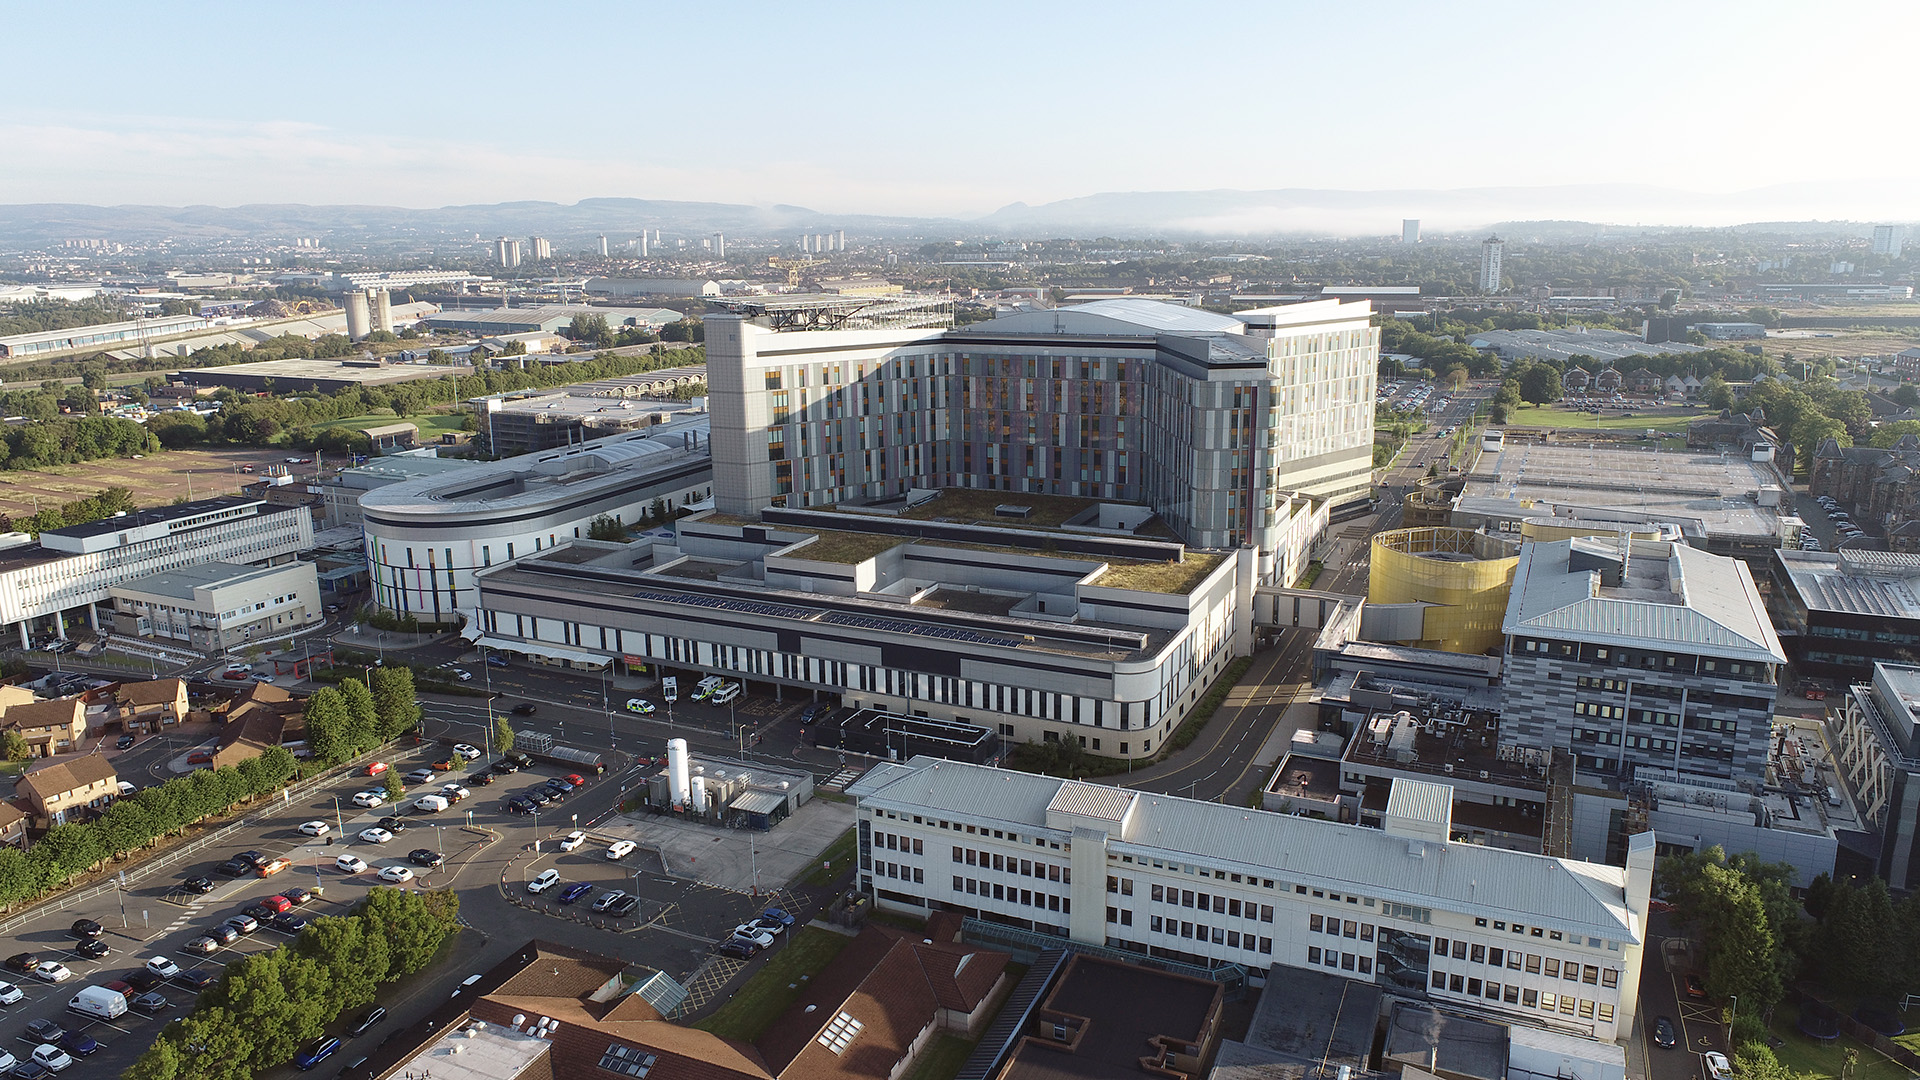 An aerial view of the Queen Elizabeth University Hospital campus, showing the main buildings.